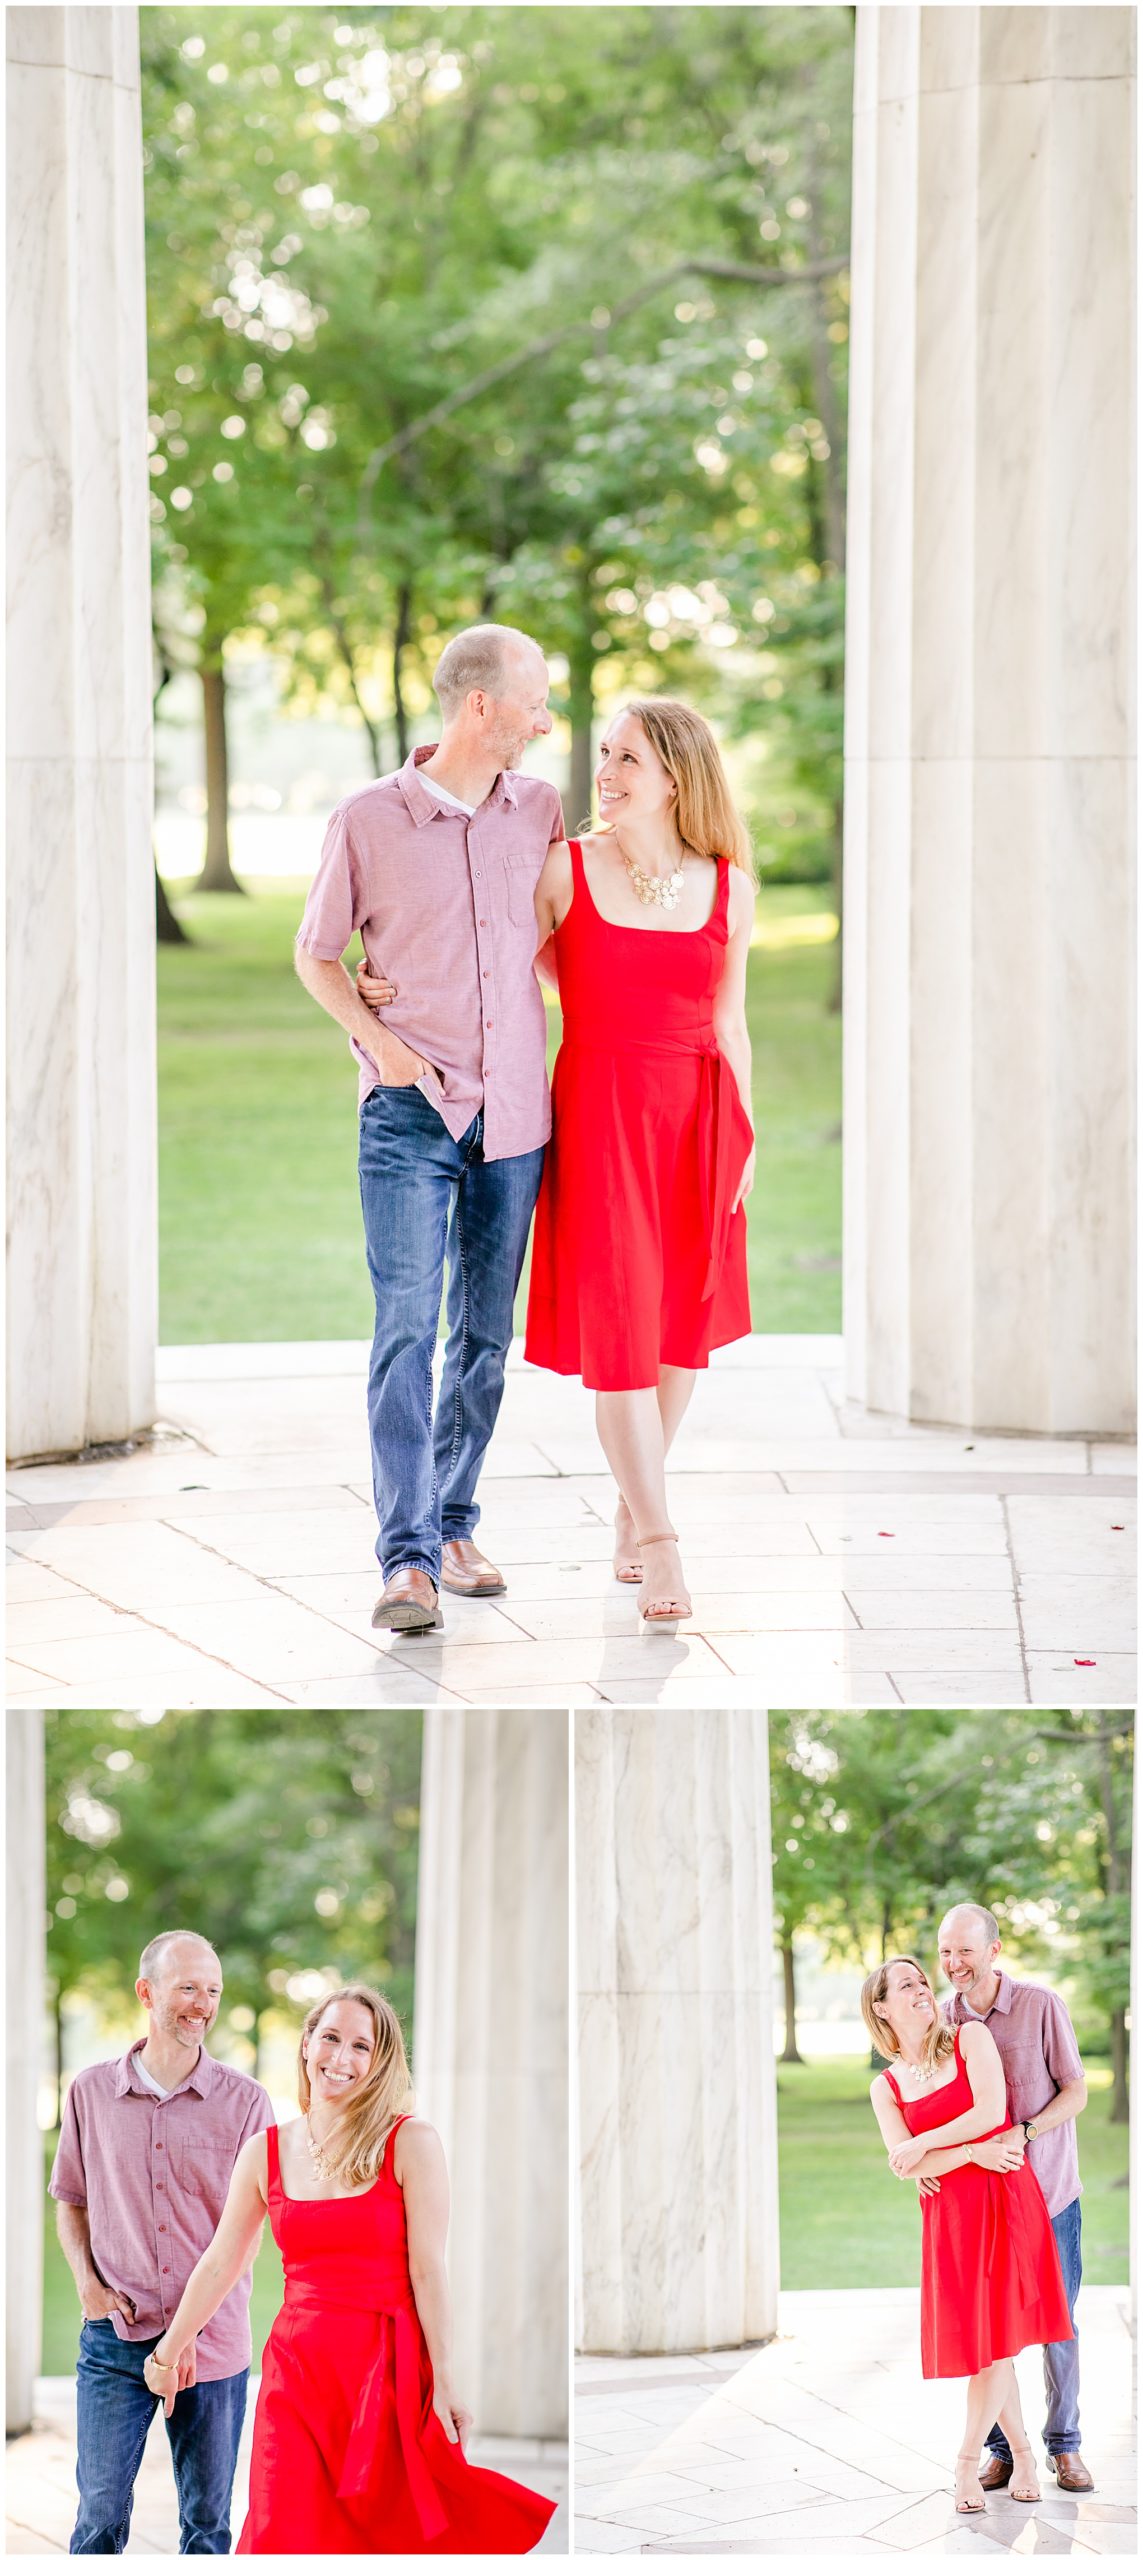 casual Lincoln Memorial engagement photos, casual engagement photos, DC engagement photos, DC engagement photographer, DC wedding photographer, natural light engagement photos, National Mall engagement photos, Rachel E.H. Photography, summer engagement photos, DC couple, red white and blue aesthetic, DC War Memorial, red sun dress